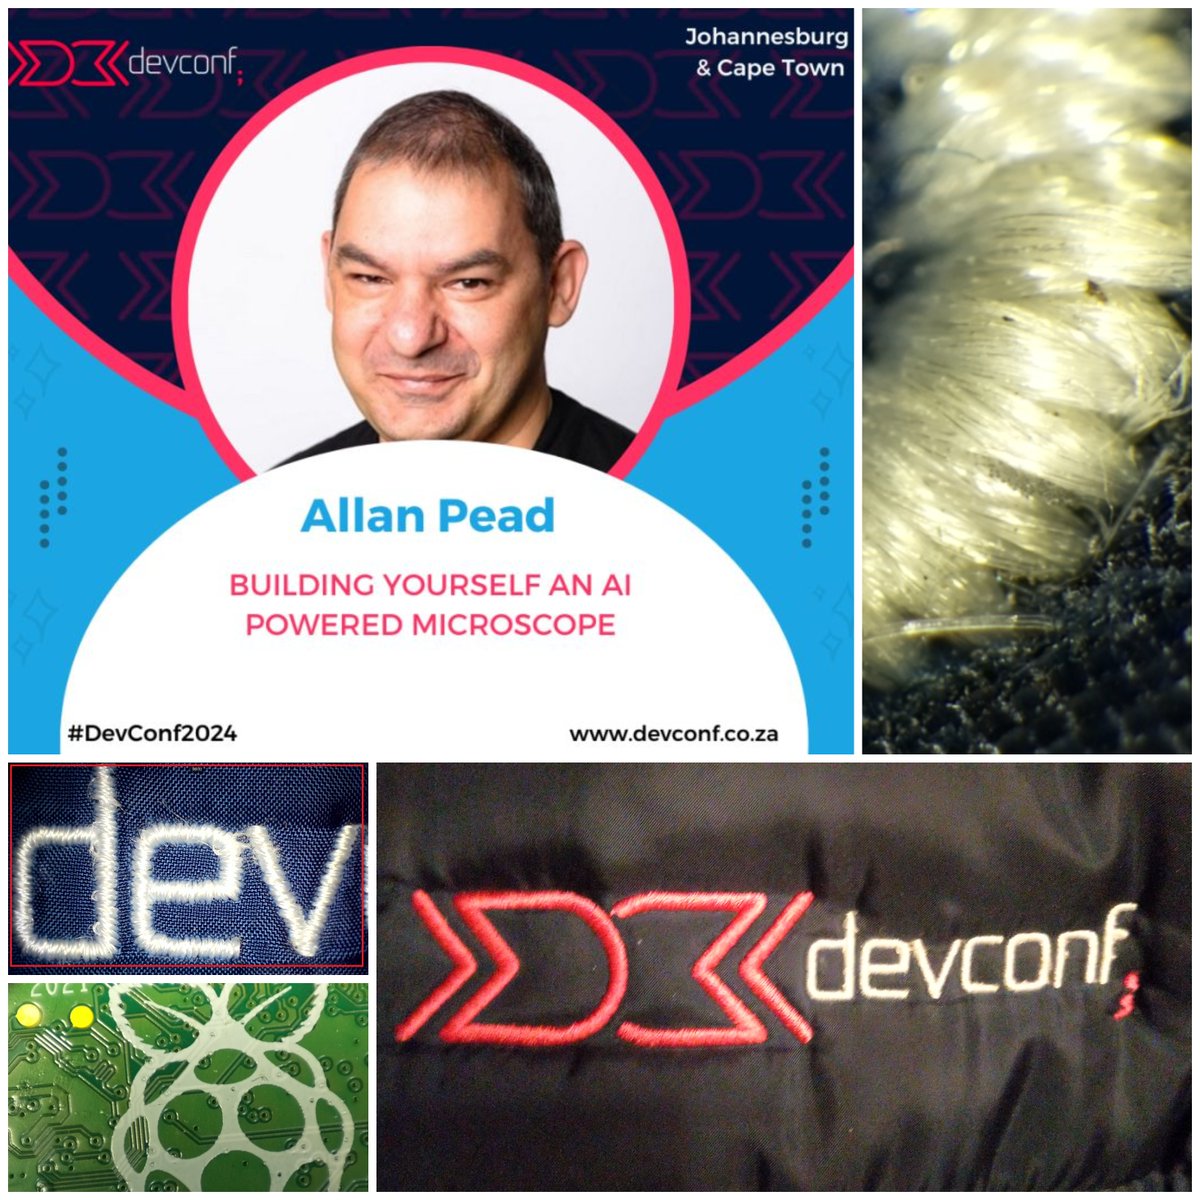 Join me and all the amazing speakers at @devconfza CPT + JHB as we put the magnifying glass on all things dev related! My session will be a fun journey, all about making things bigger with tech and with some assistance of AI. #diy #devconf2024 #ai #dotnet #accessibility #iot